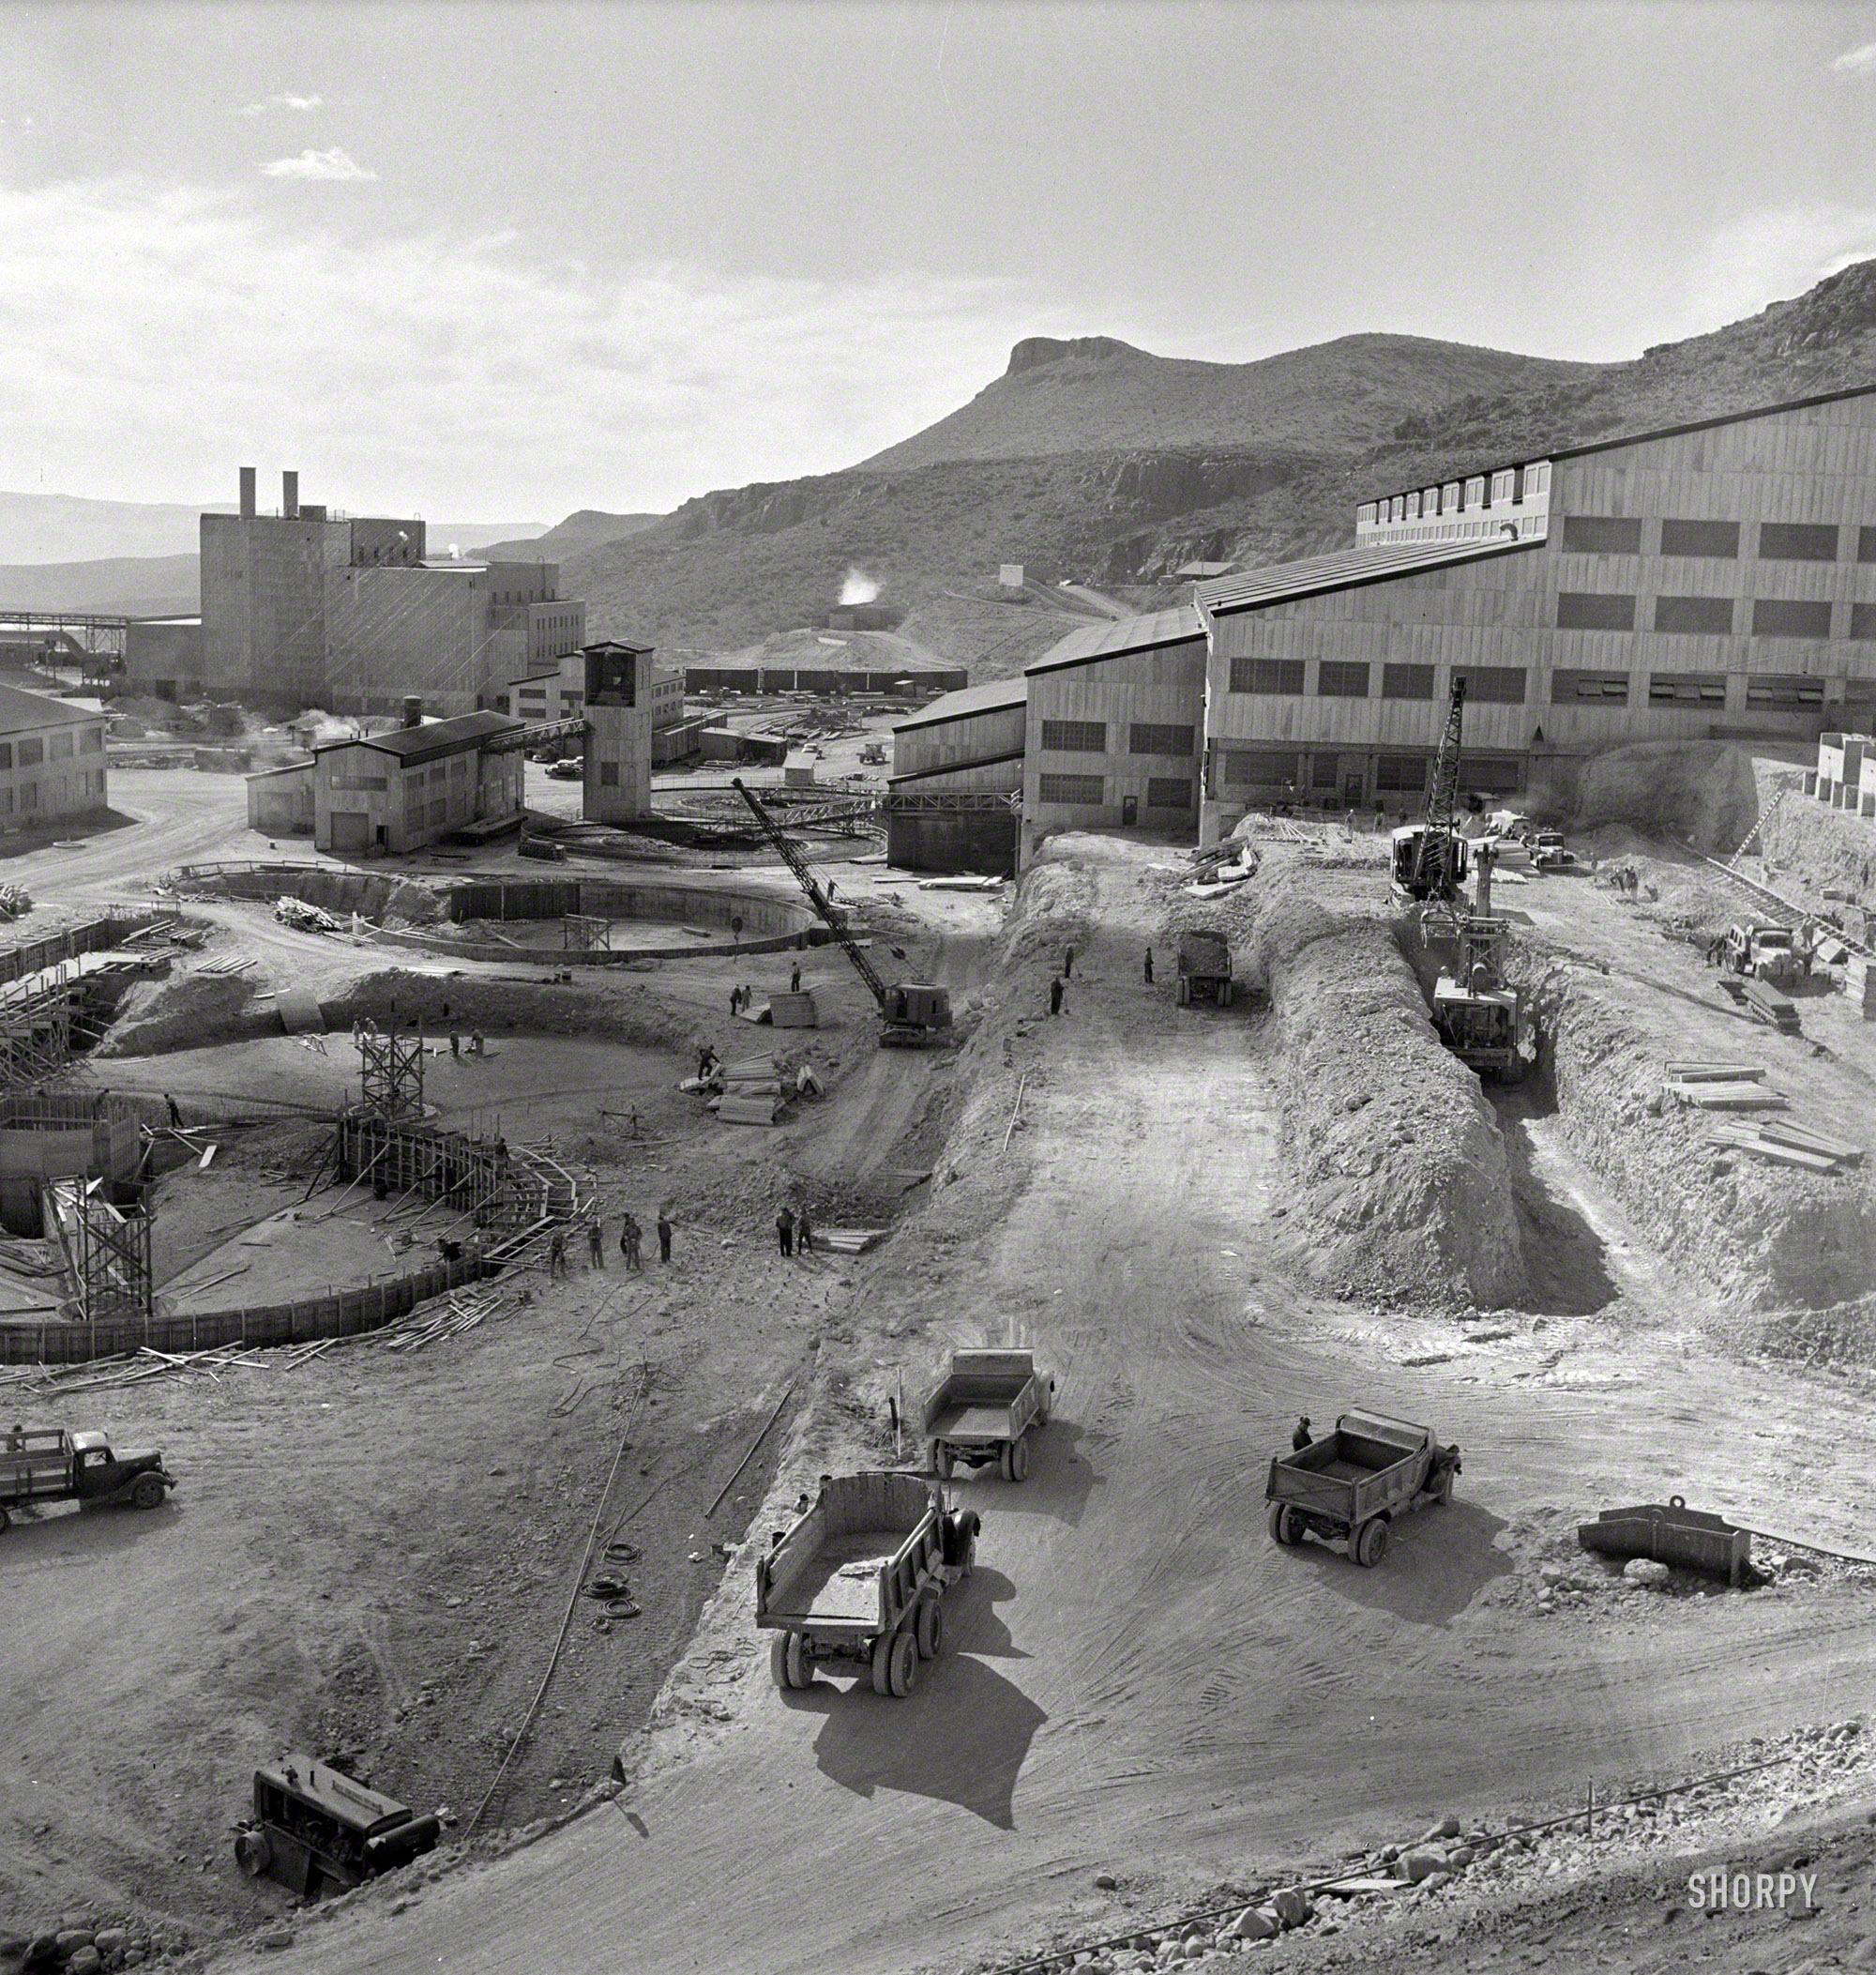 December 1942. "Part of the copper concentrating plant of the Phelps-Dodge Mining Company at Morenci, Arizona. This plant supplies great quantities of the copper so vital in our war effort." Photo by Fritz Henle. View full size.